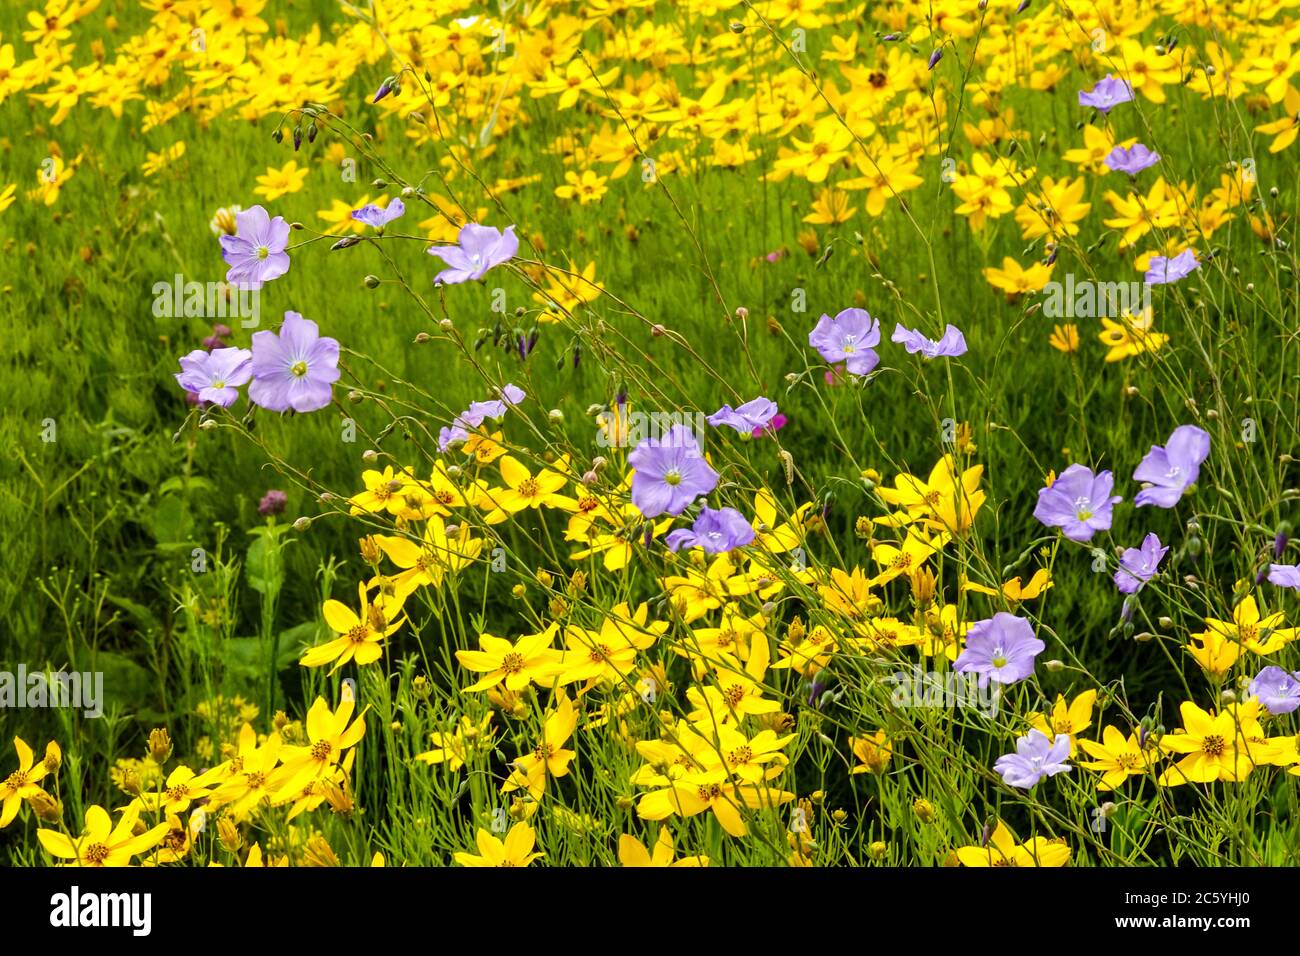 Blue yellow flower bed in july Coreopsis Linum Stock Photo